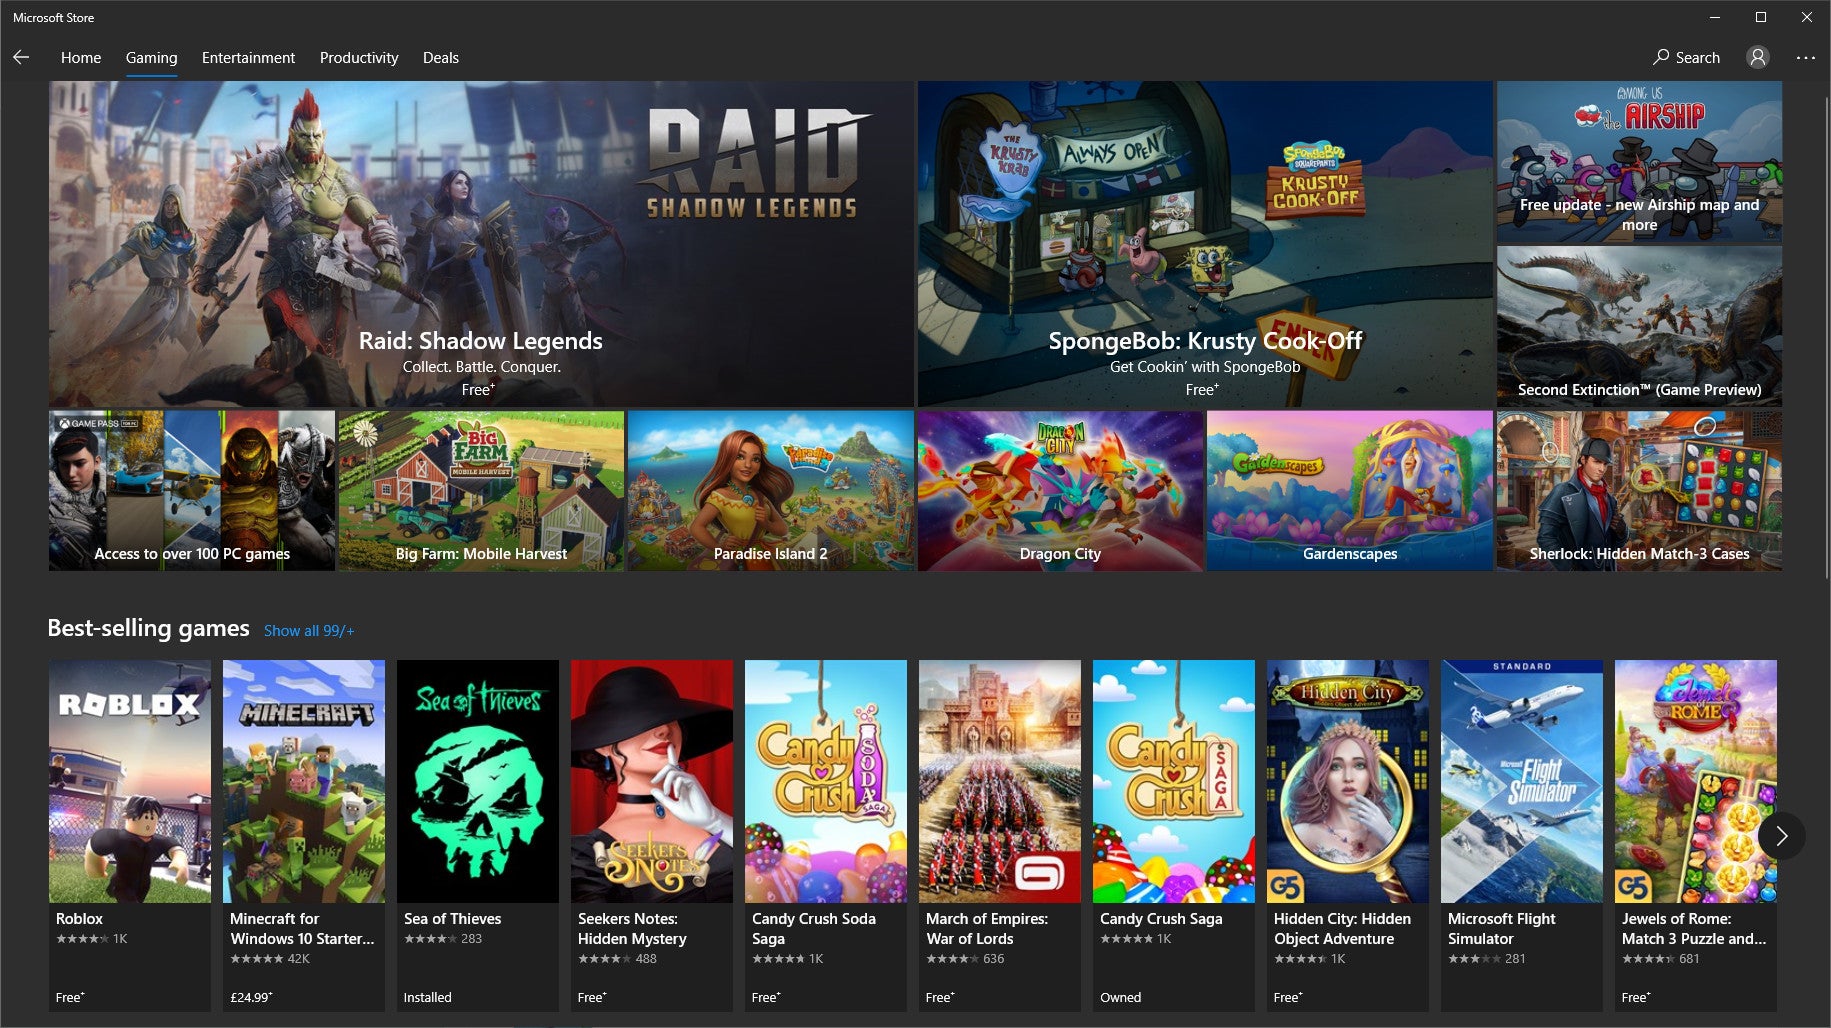 A screenshot of the Microsoft Store's main Gaming page.